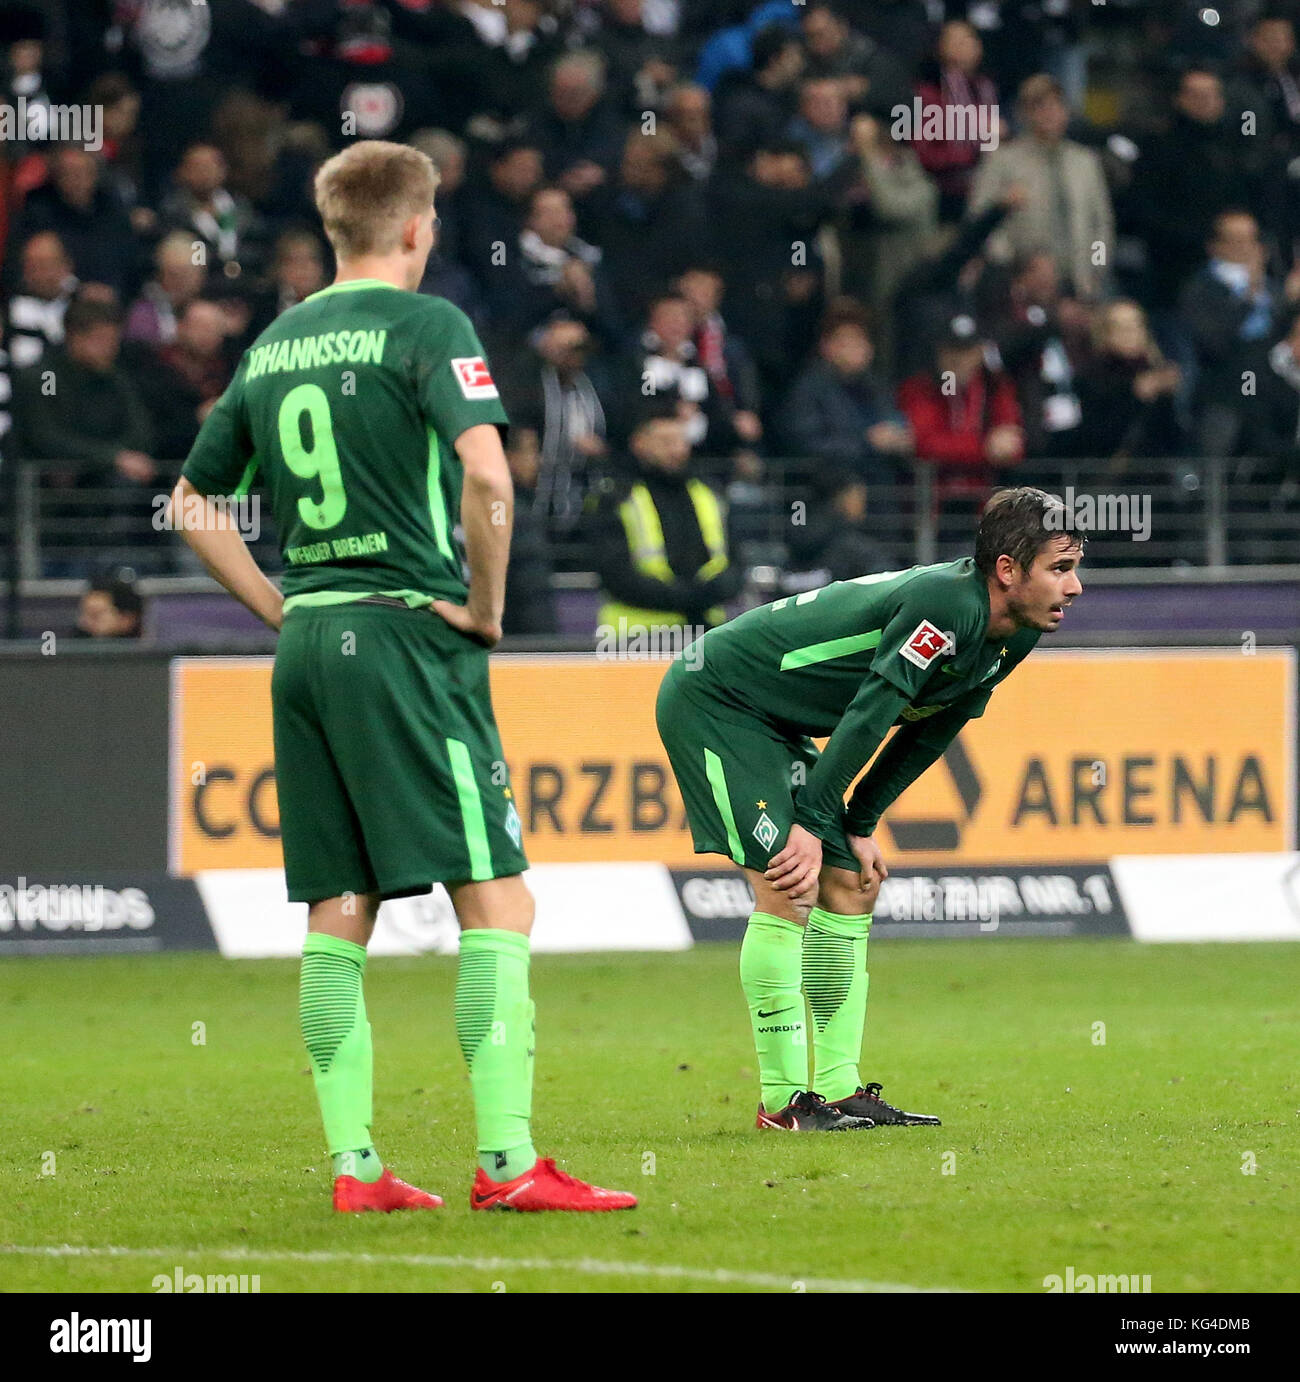 Bremen's Aron Johannsson (L) and Fin Bartels (R) look disappointed after their defeat during the German Bundesliga soccer match between Eintracht Frankfurt and Werder Bremen in Frankfurt/M., Germany, 03 November 2017. Photo: Hasan Bratic/dpa Stock Photo